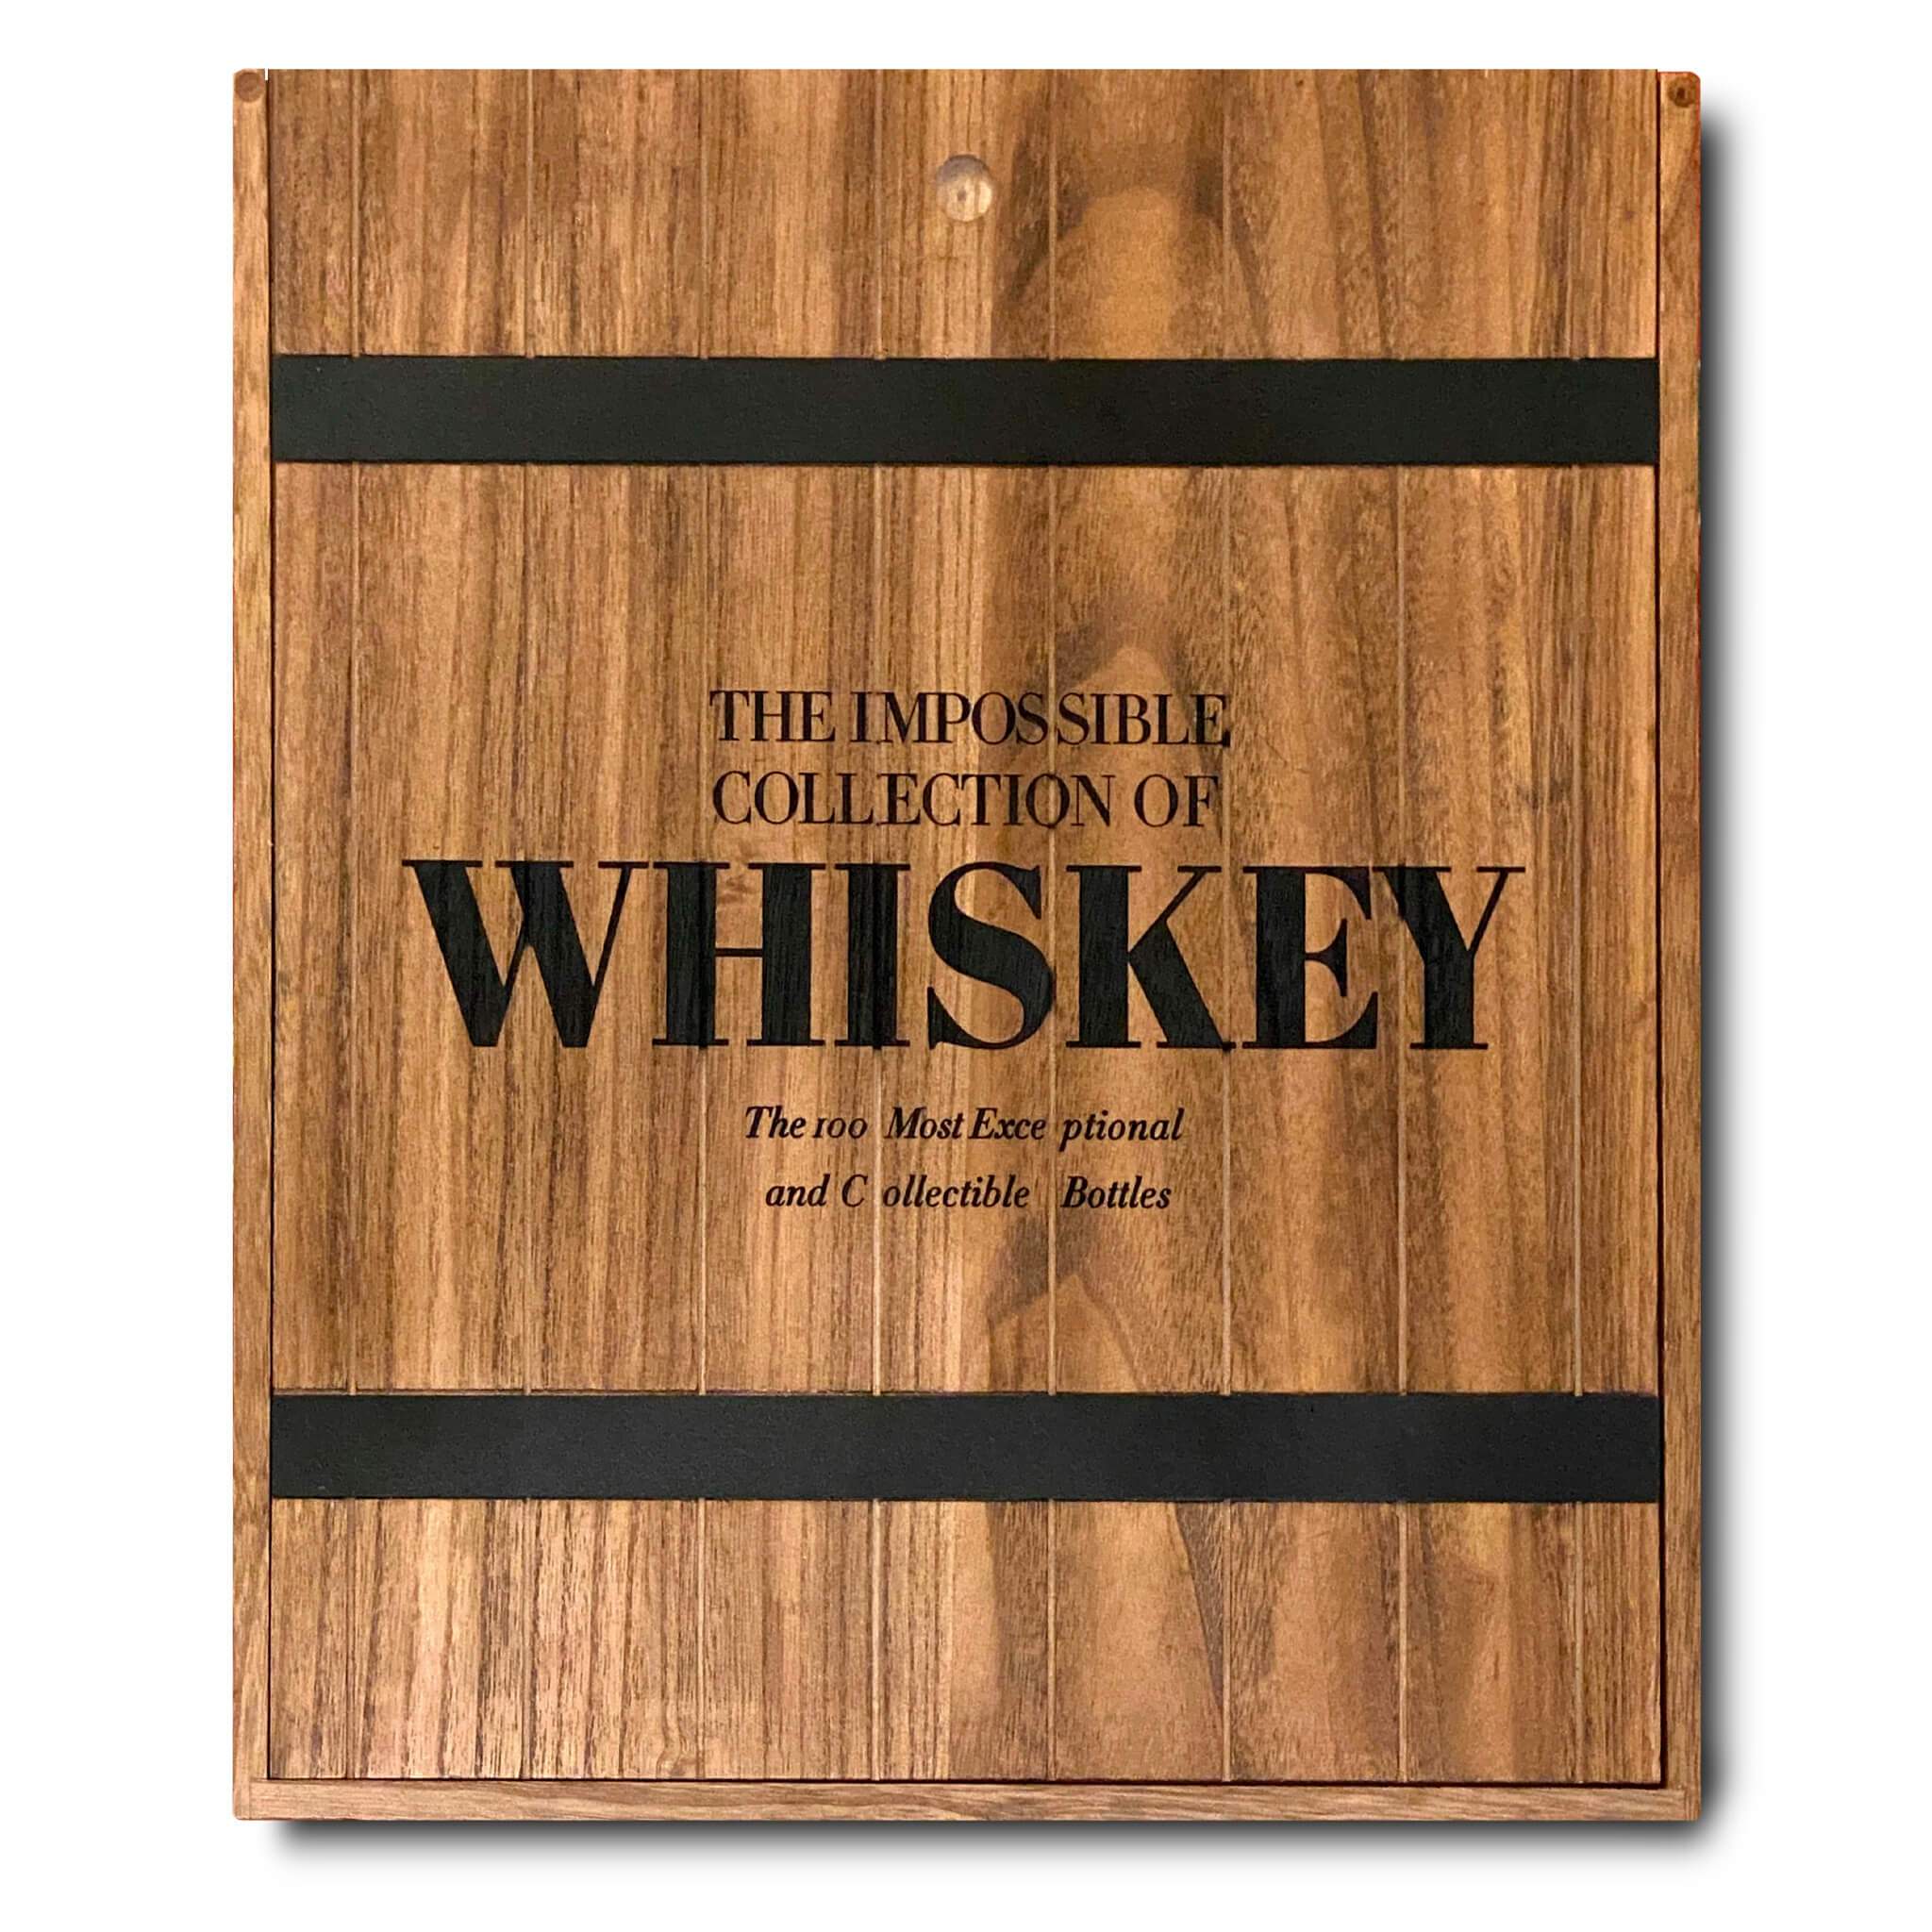 LIVRE ULTIMATE THE IMPOSSIBLE COLLECTION OF WHISKEY